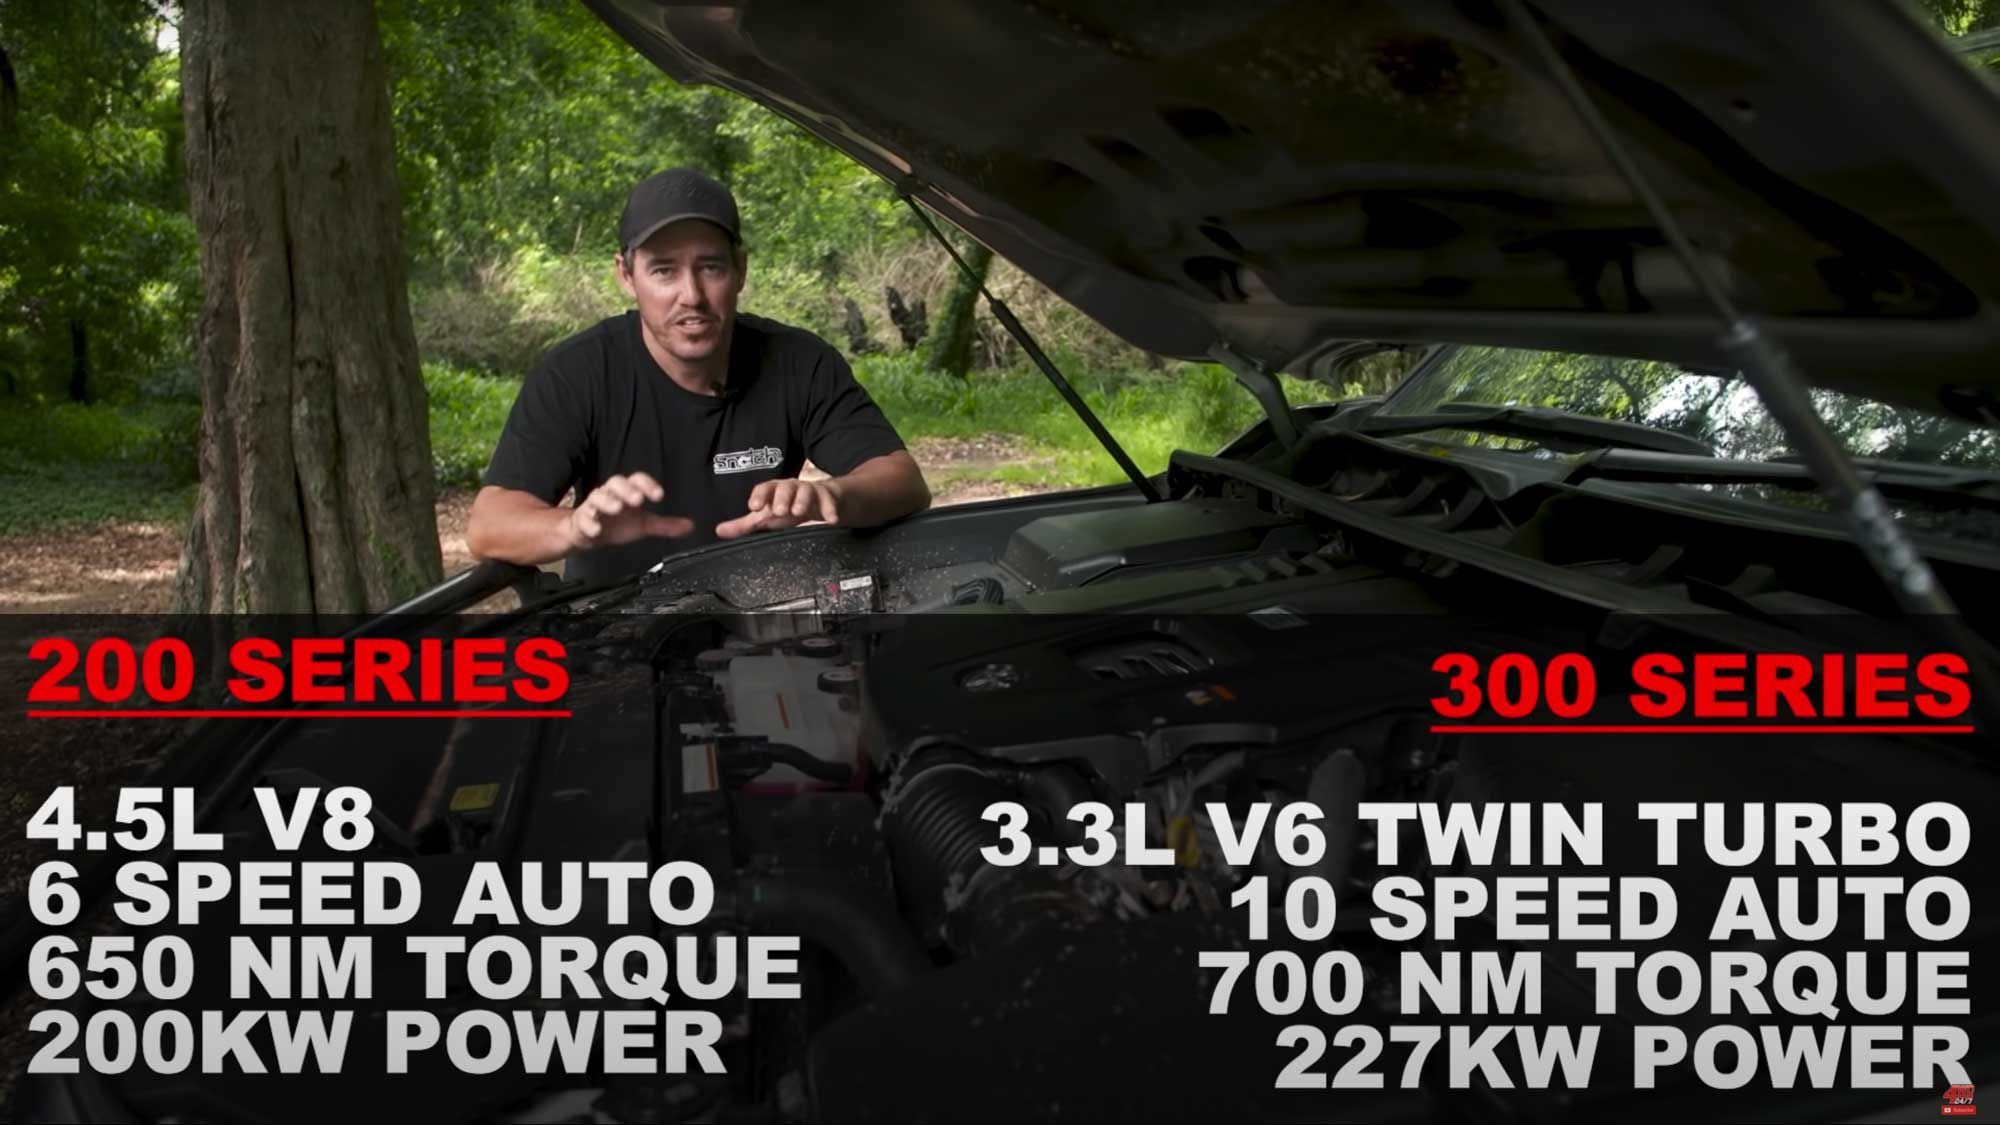 Comparing engine changes in the Land Cruiser model.